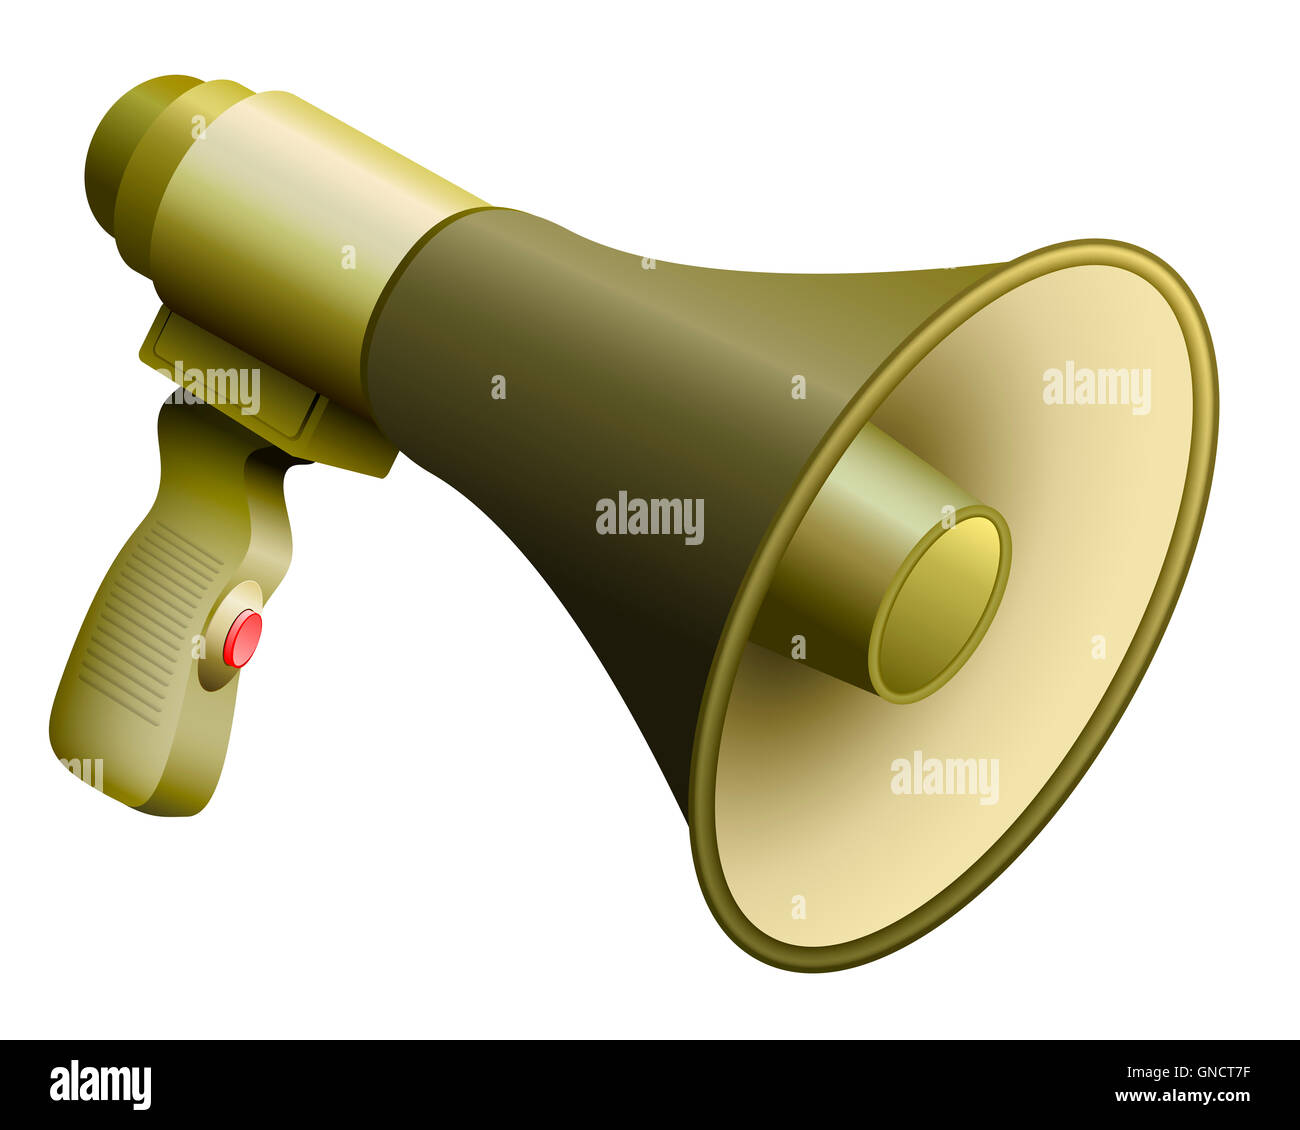 Army bullhorn or megaphone with handle and button. Stock Photo